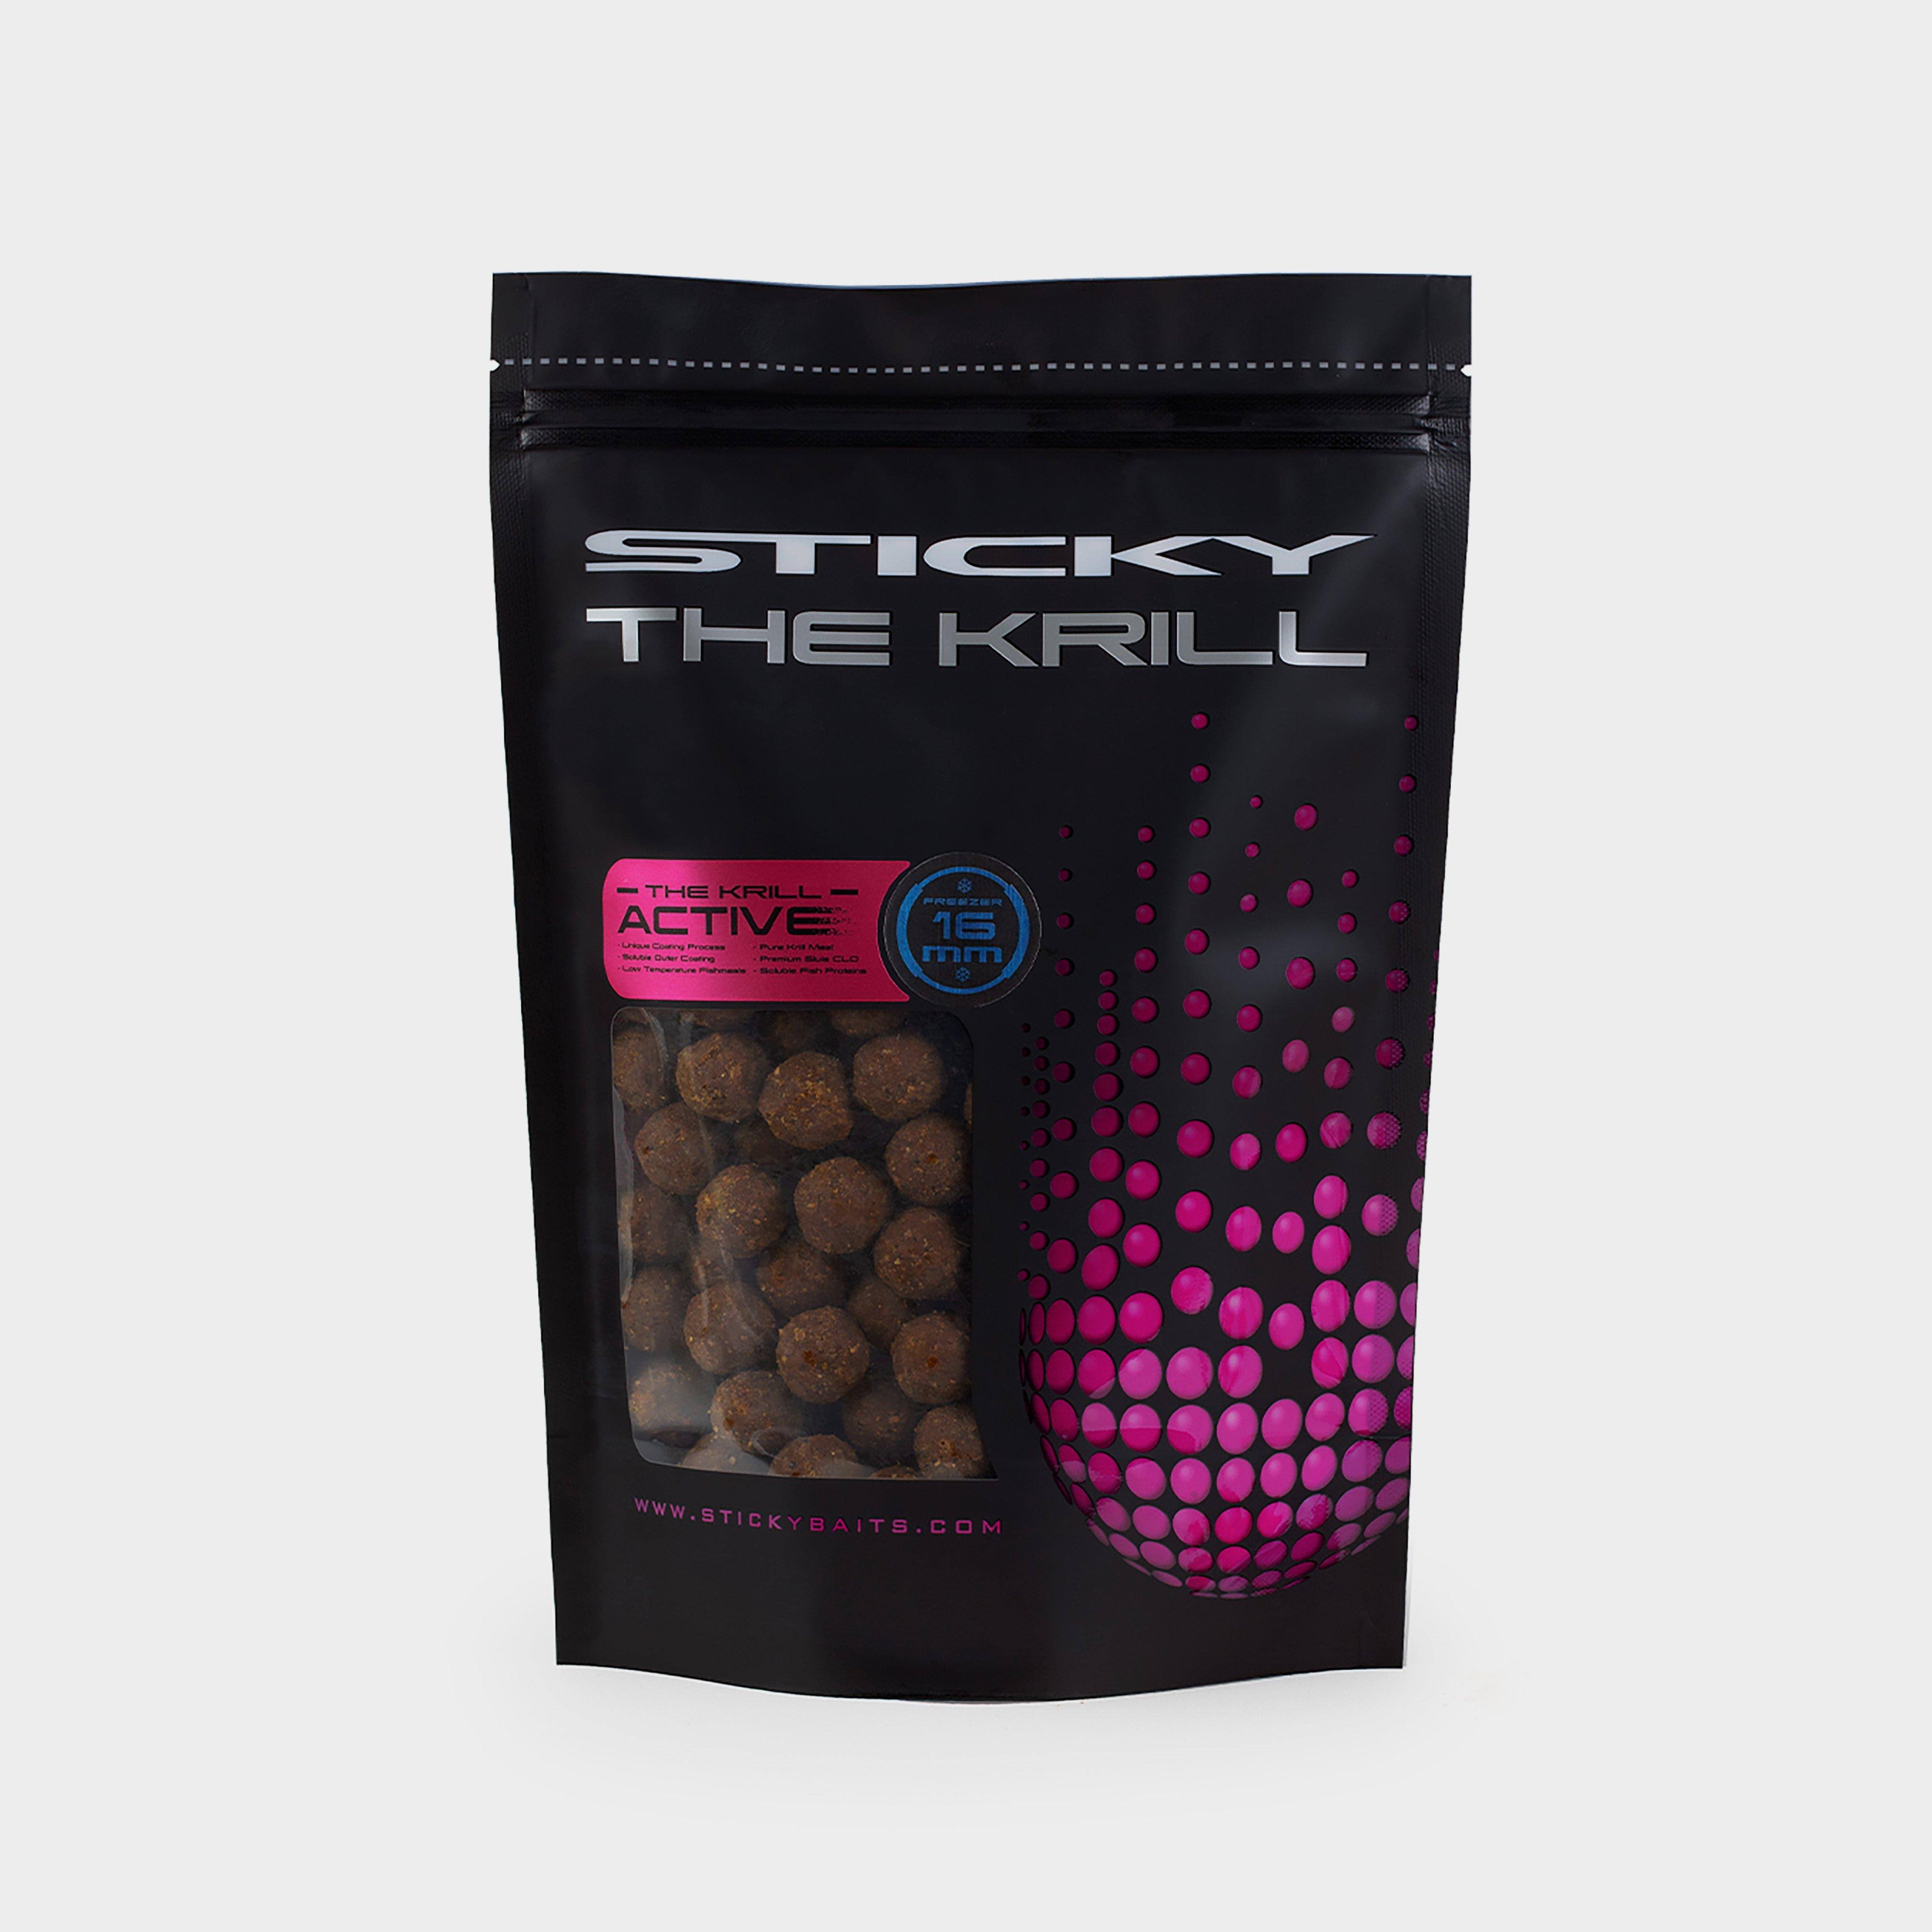 Sticky Baits The Krill Active Tuff Ones 